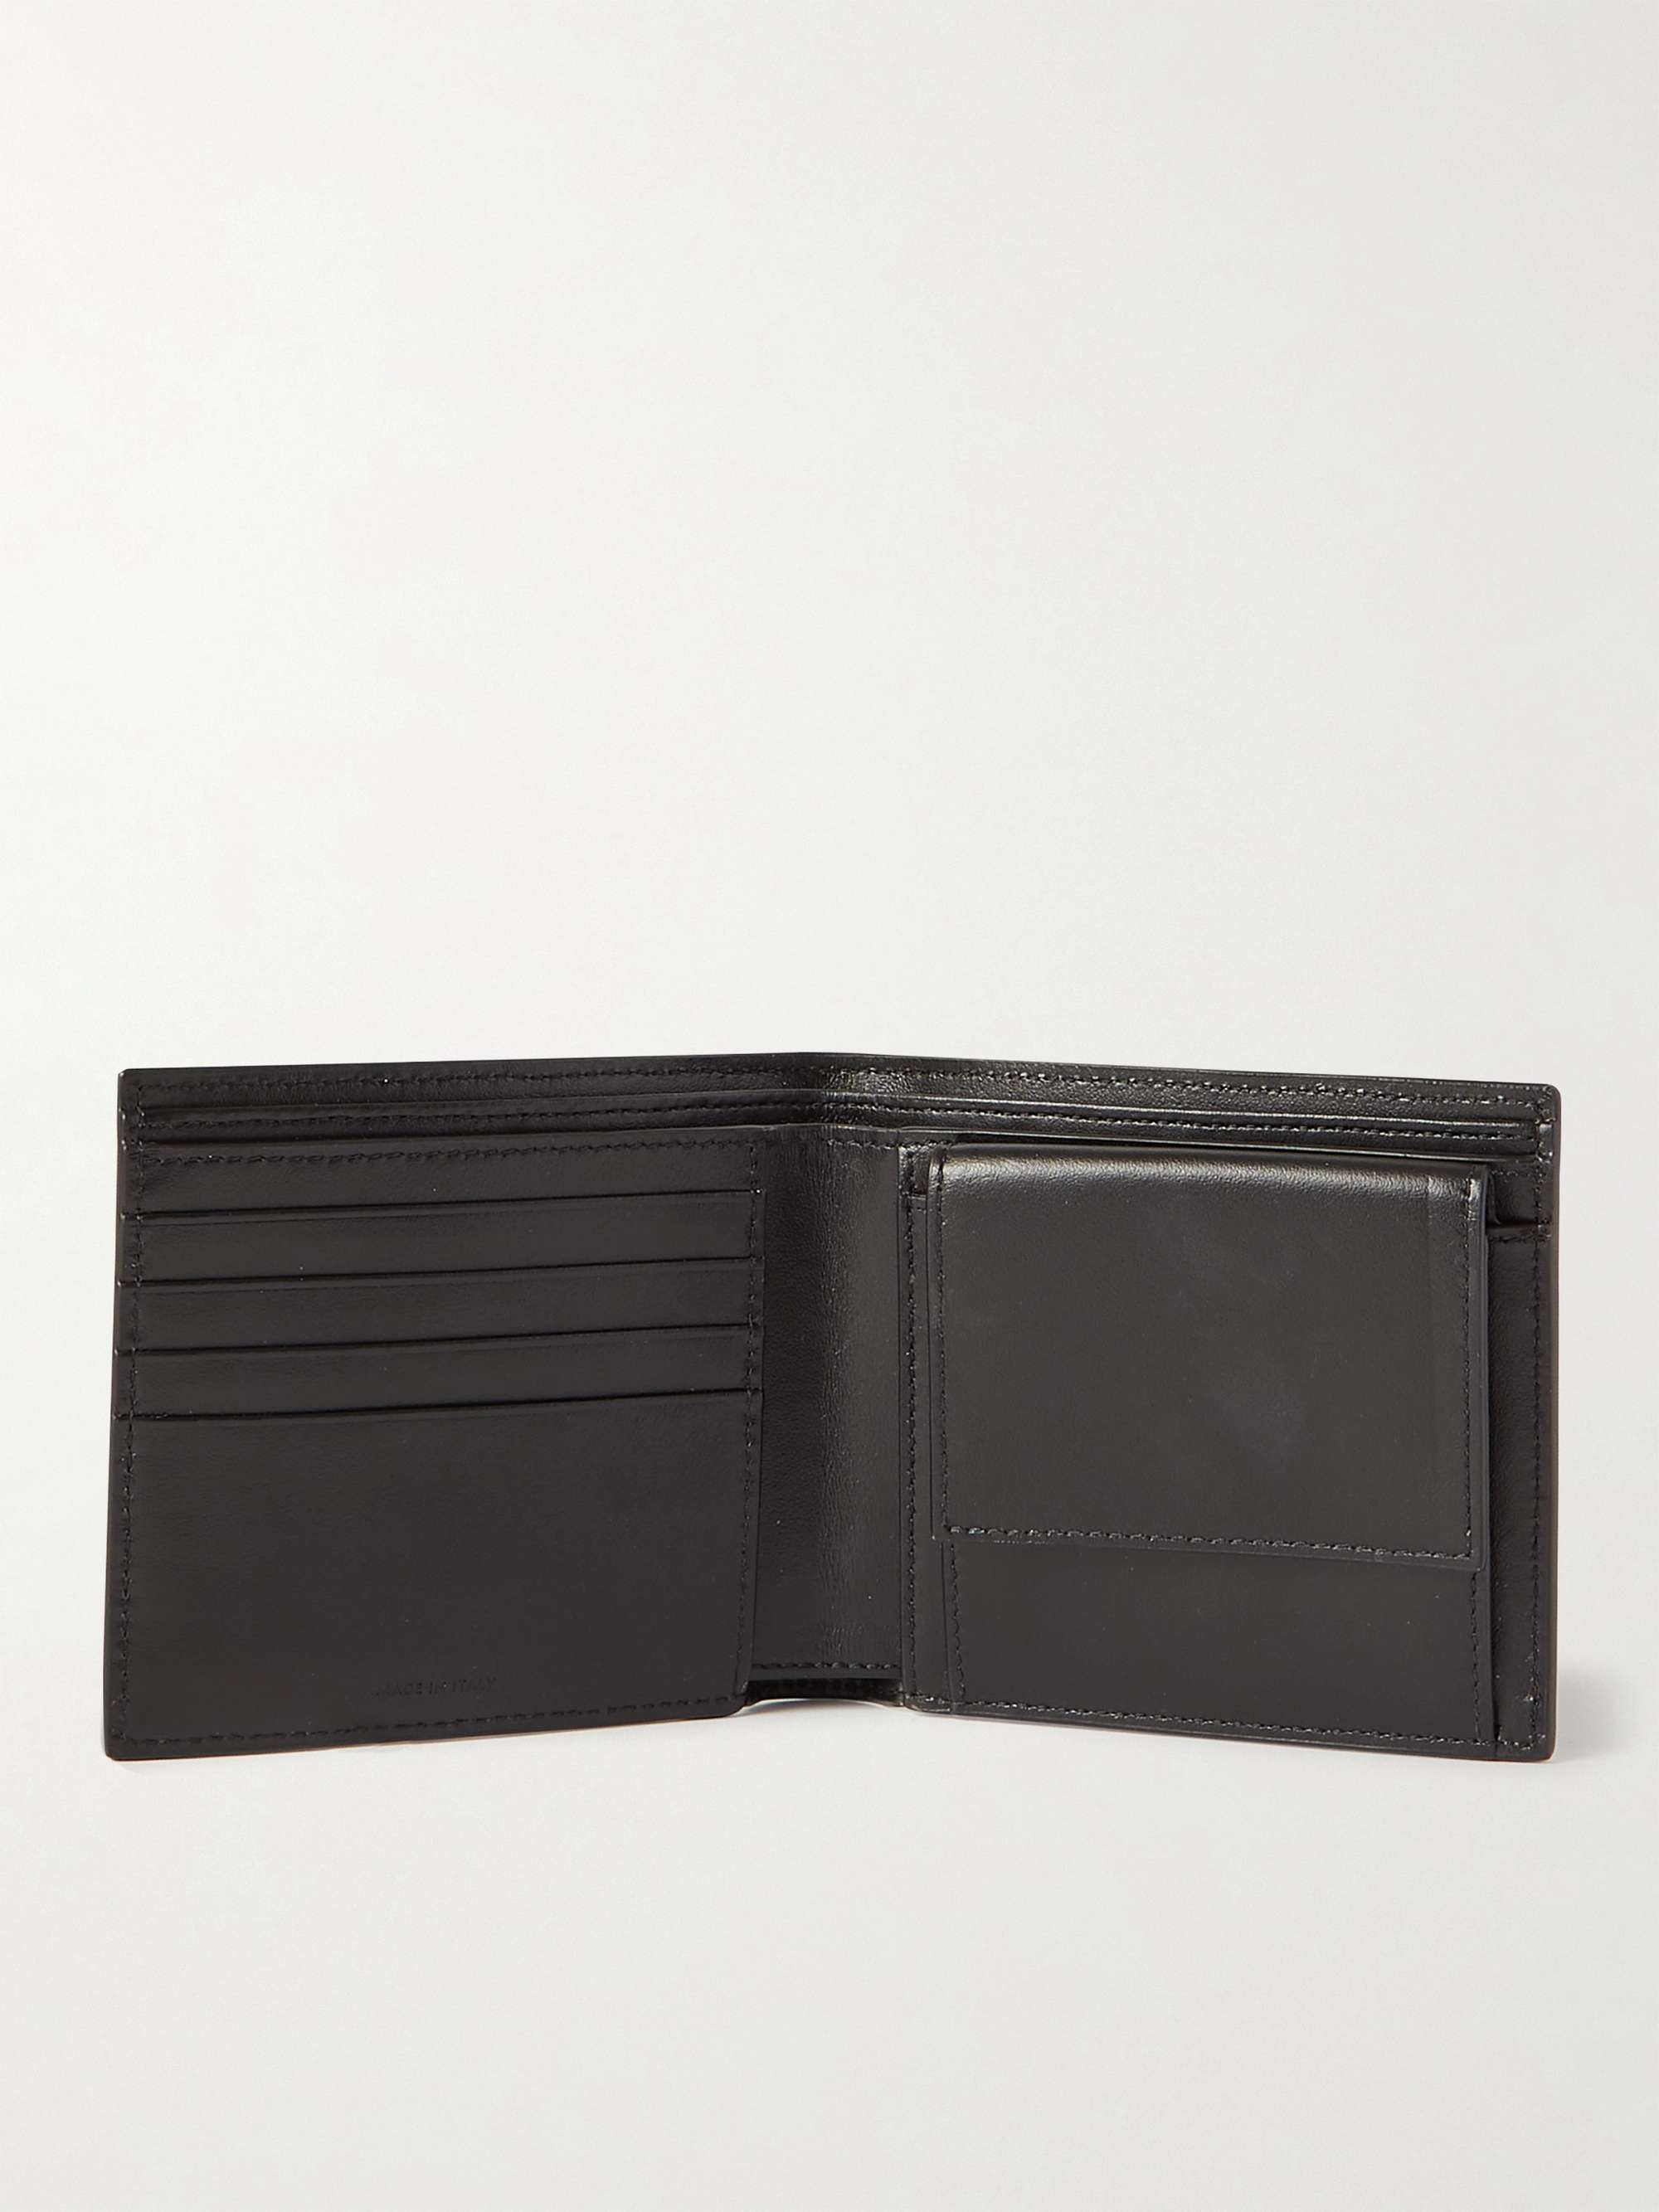 CELINE HOMME Triomphe Leather-Trimmed Coated-Canvas Billfold